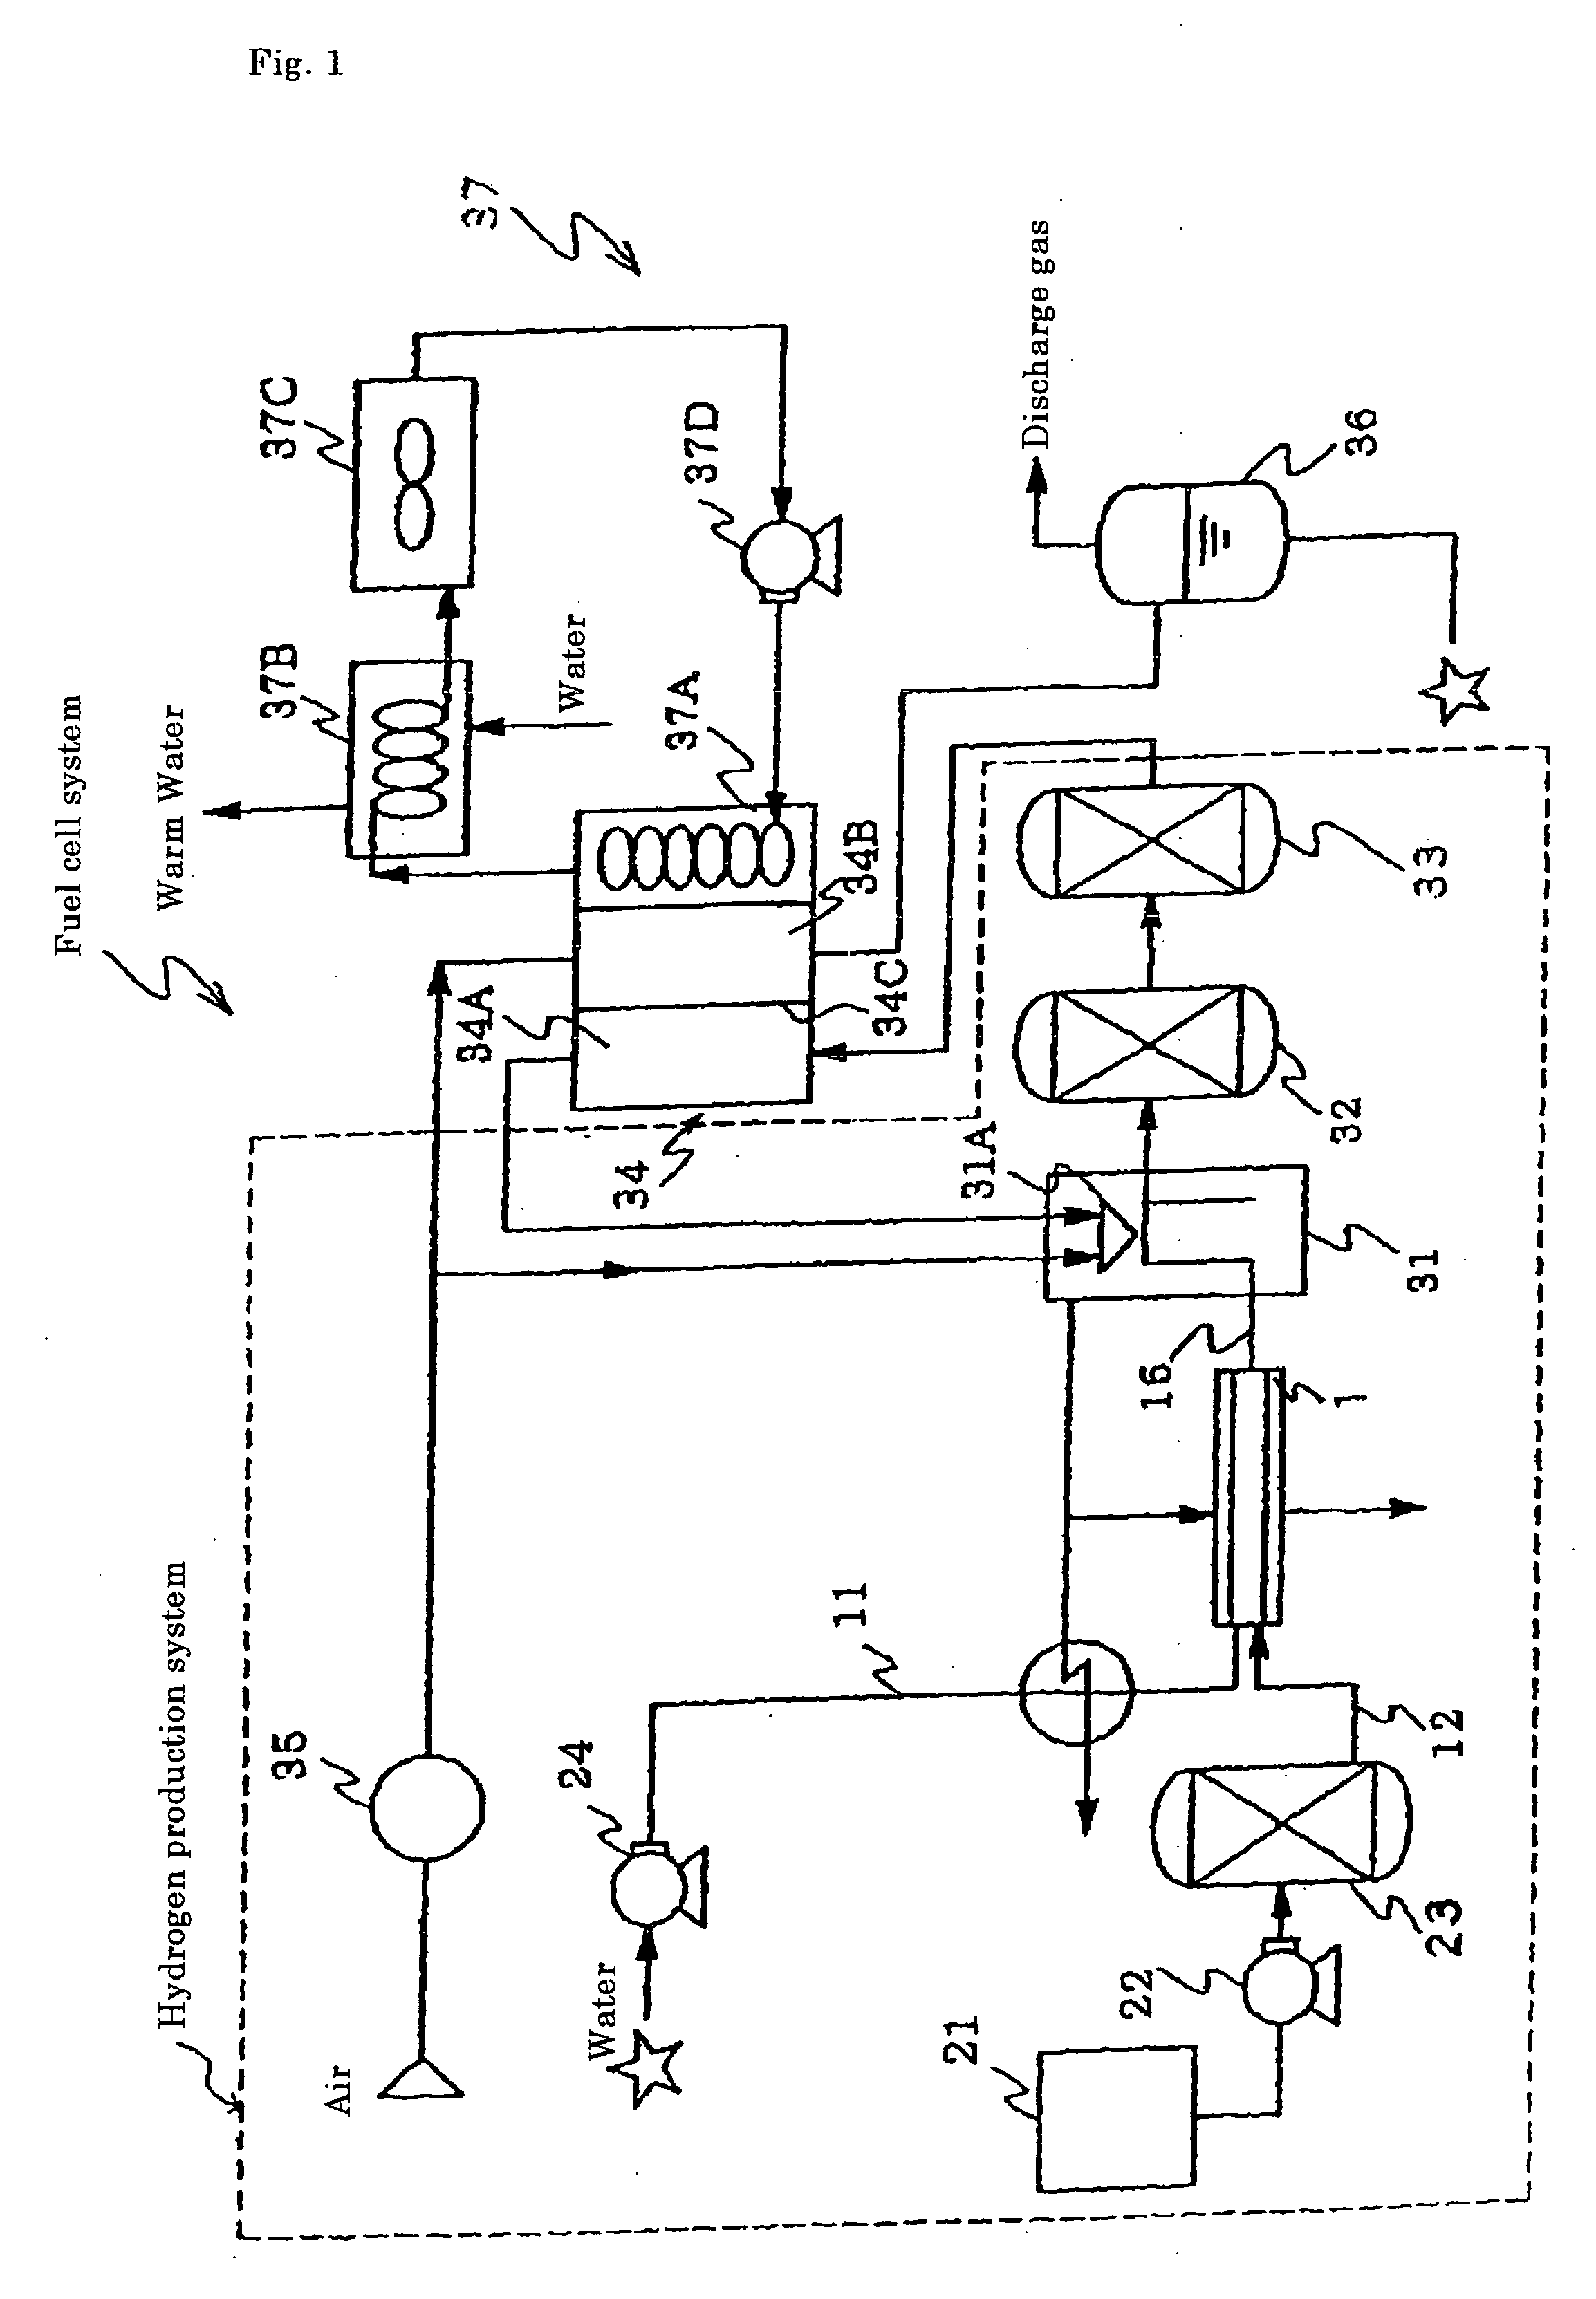 Reforming catalyst for hydrocarbon, method for producing hydrogen using such reforming catalyst, and fuel cell system